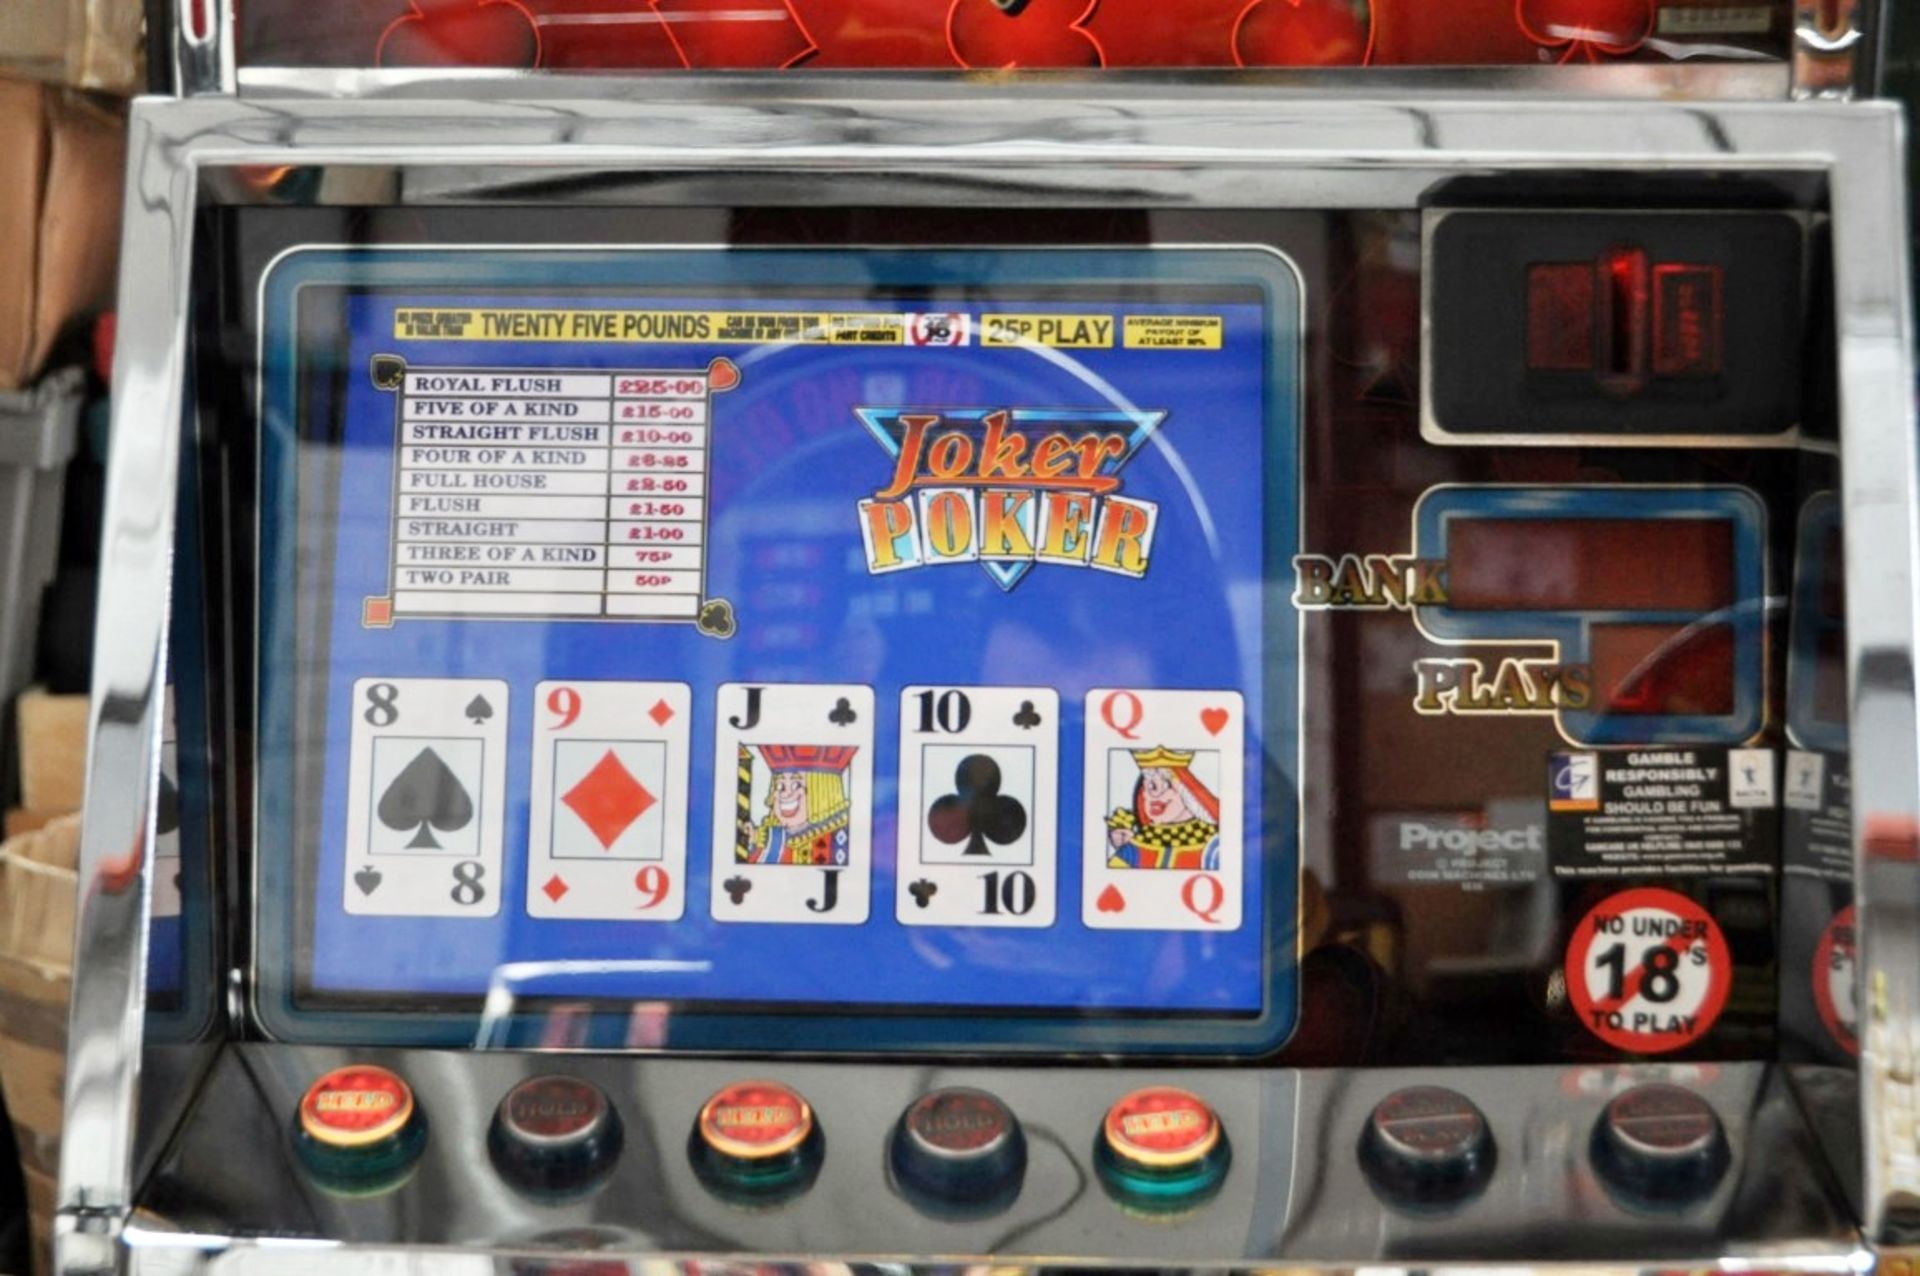 1 x "JACKPOT JOKER POKER" Arcade Fruit Machine - Manufacturer: Project - Pre-Owned In Good Working - Image 2 of 3